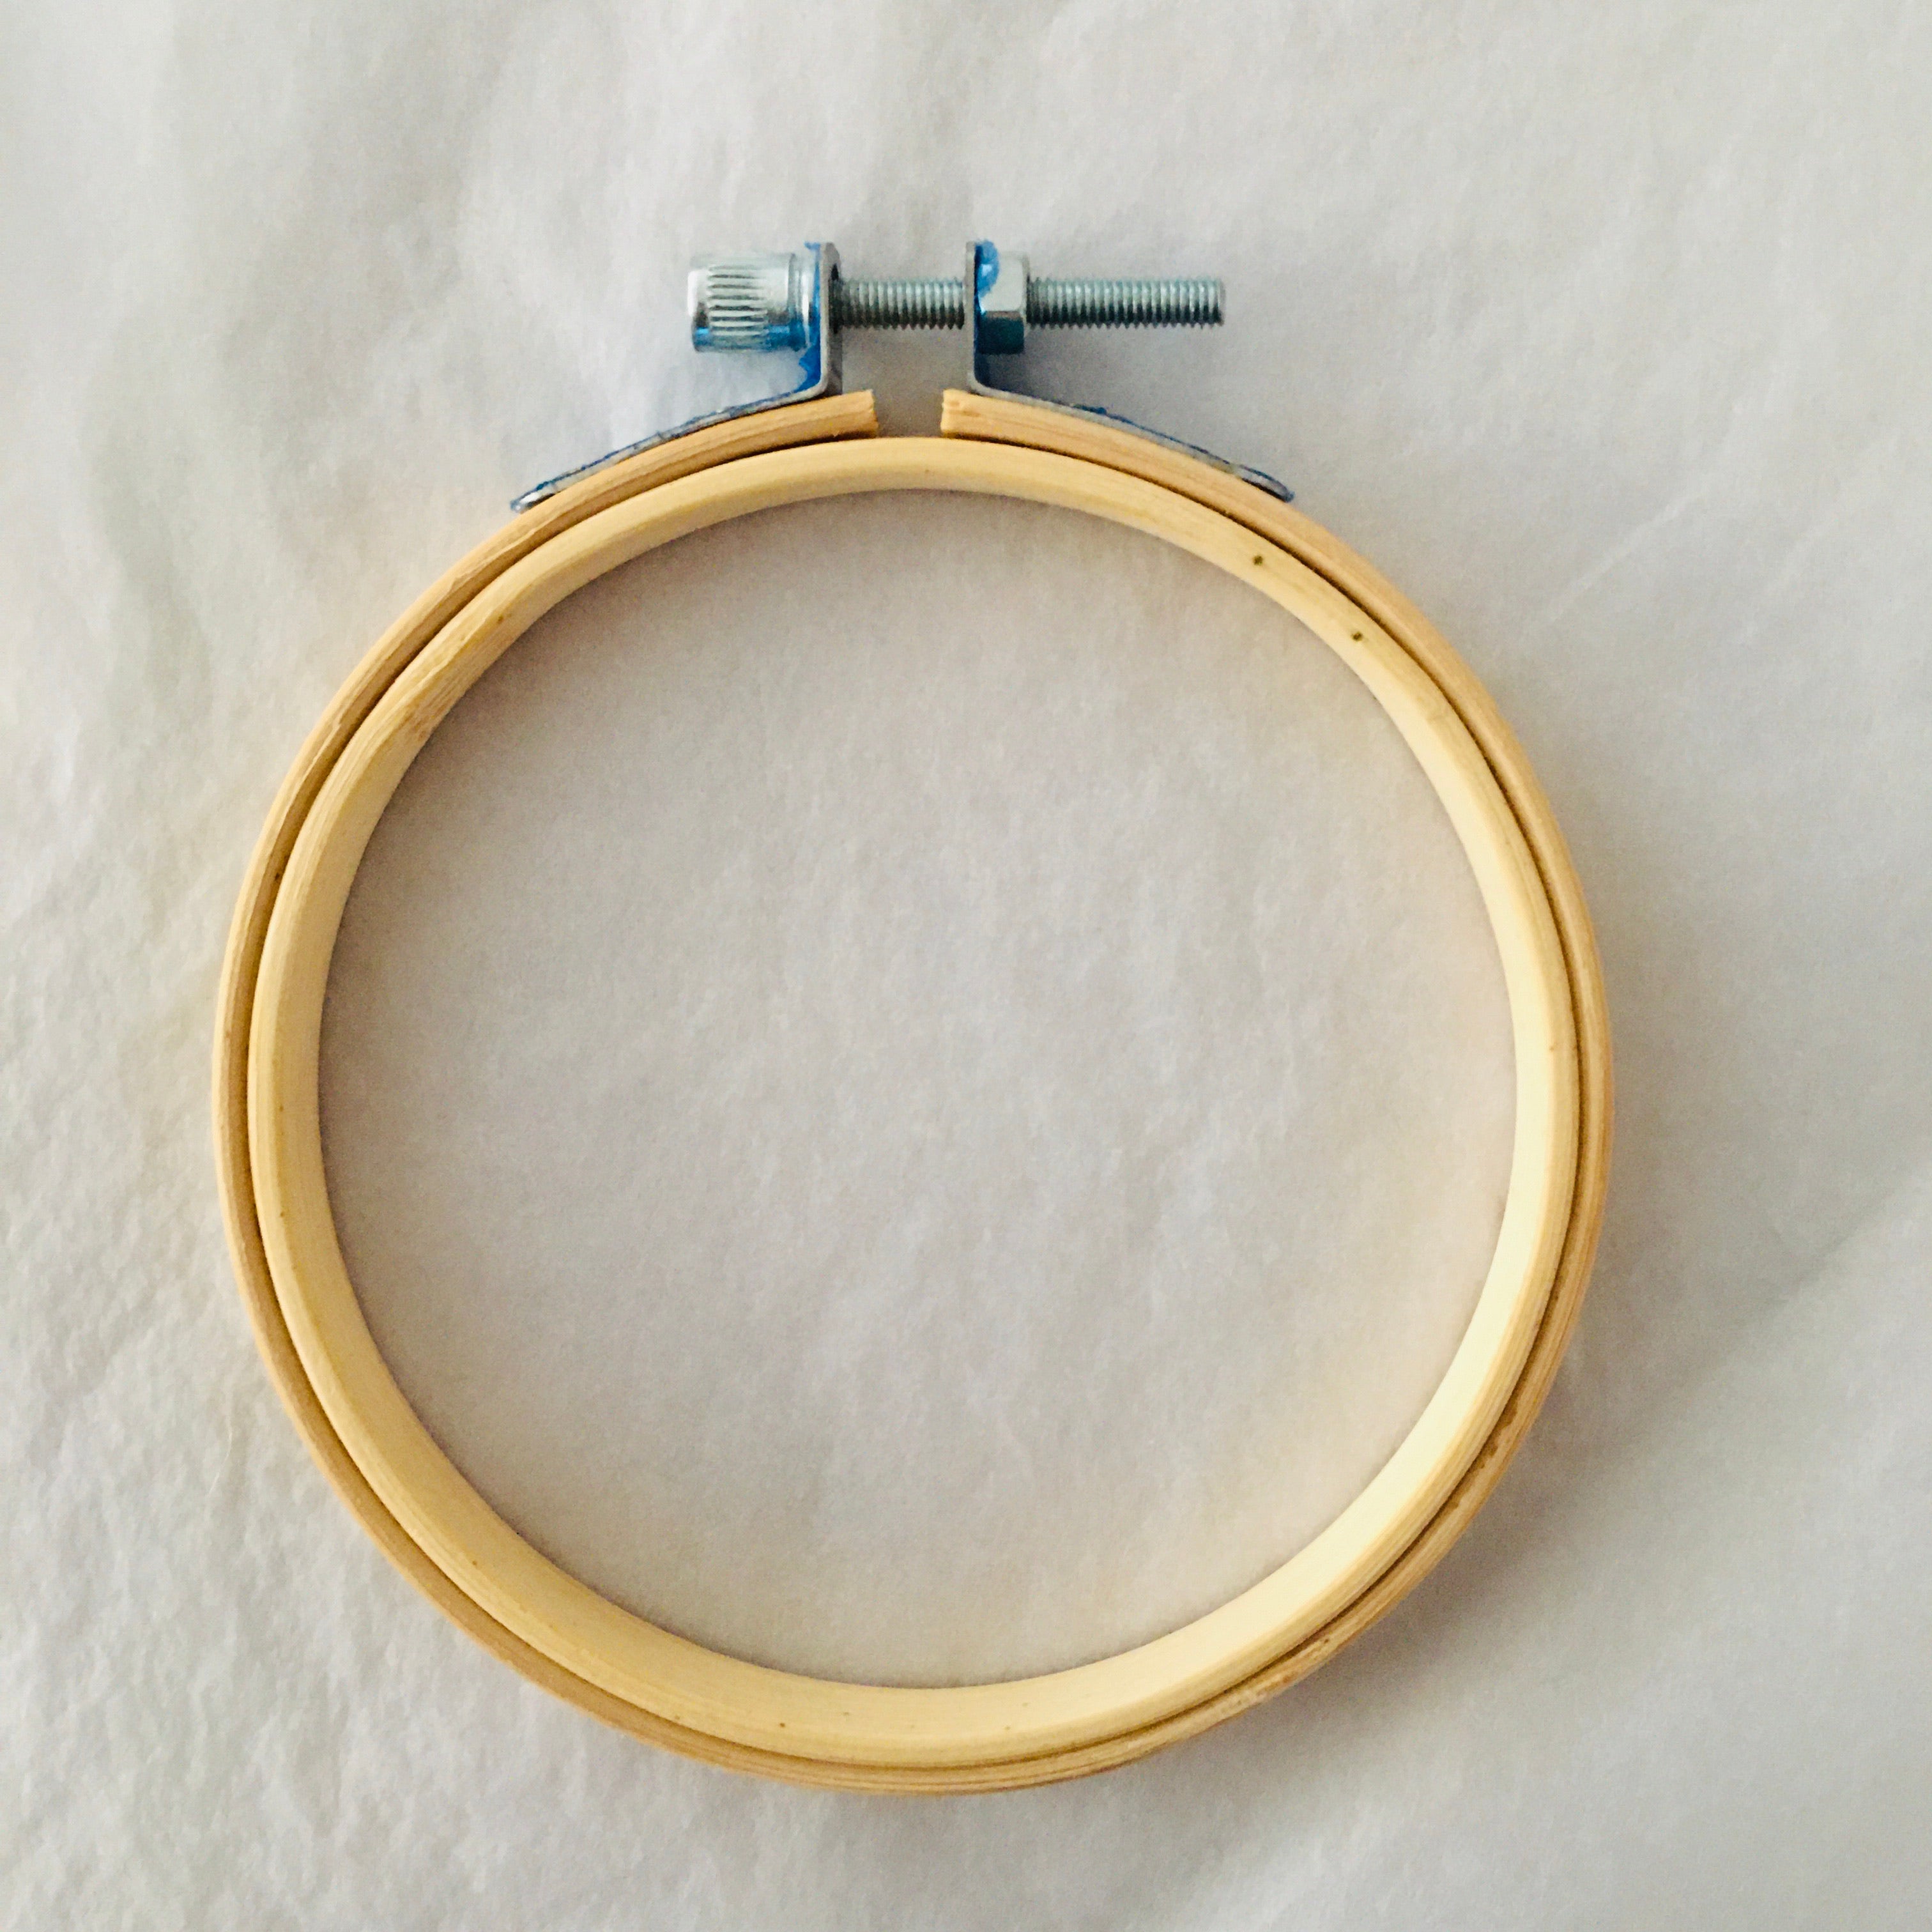 Small bamboo embroidery hoop 4”